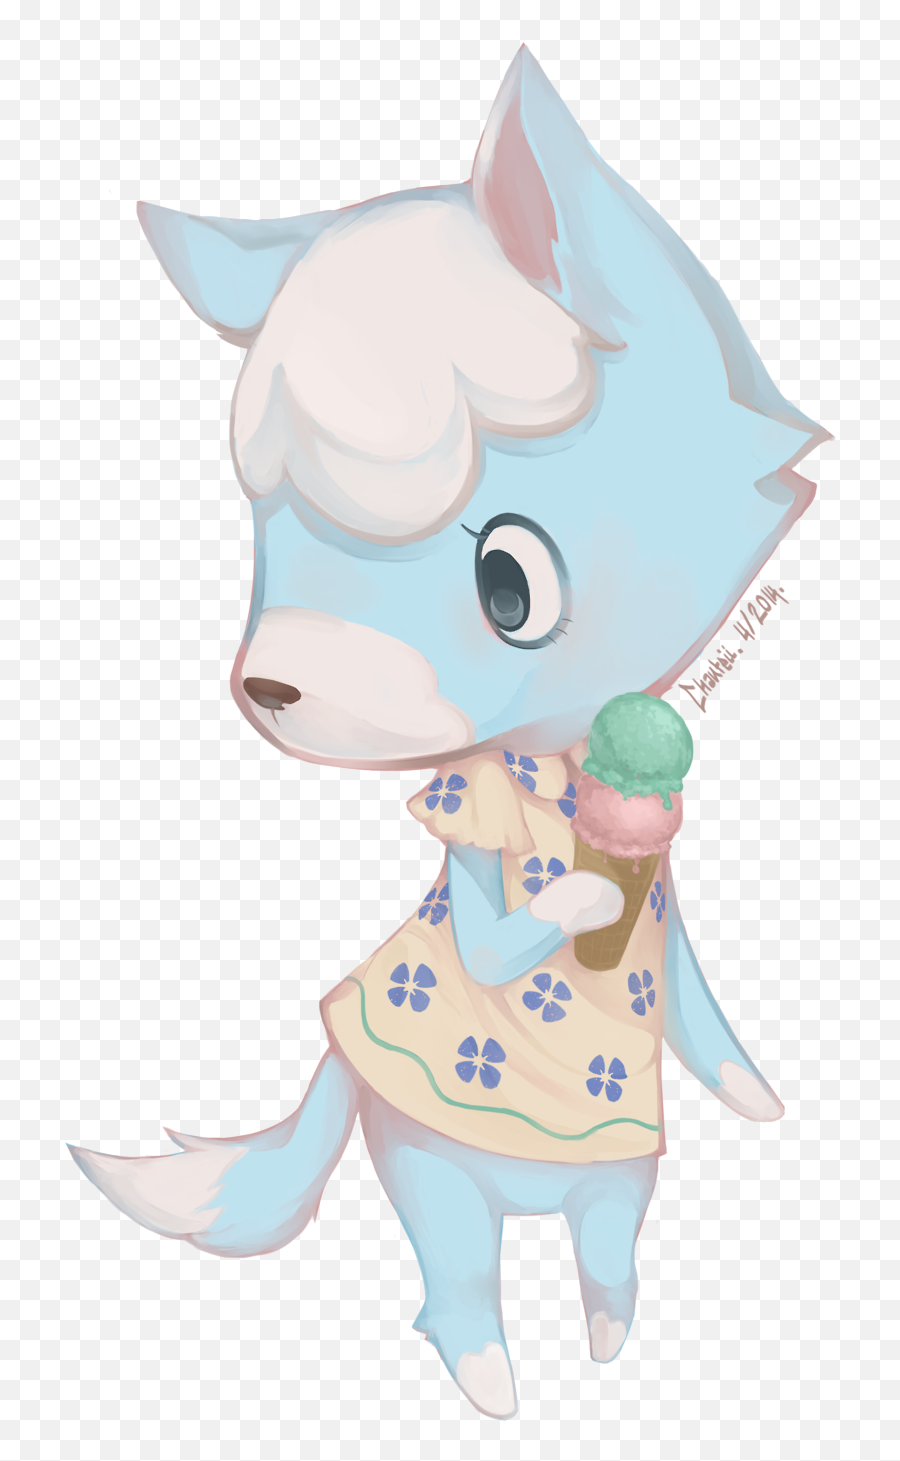 Pin By Crème Brulee On Animal Crossing Fan Art Animal - Cute Animal Crossing Skye Emoji,Acnl Emotion Posing